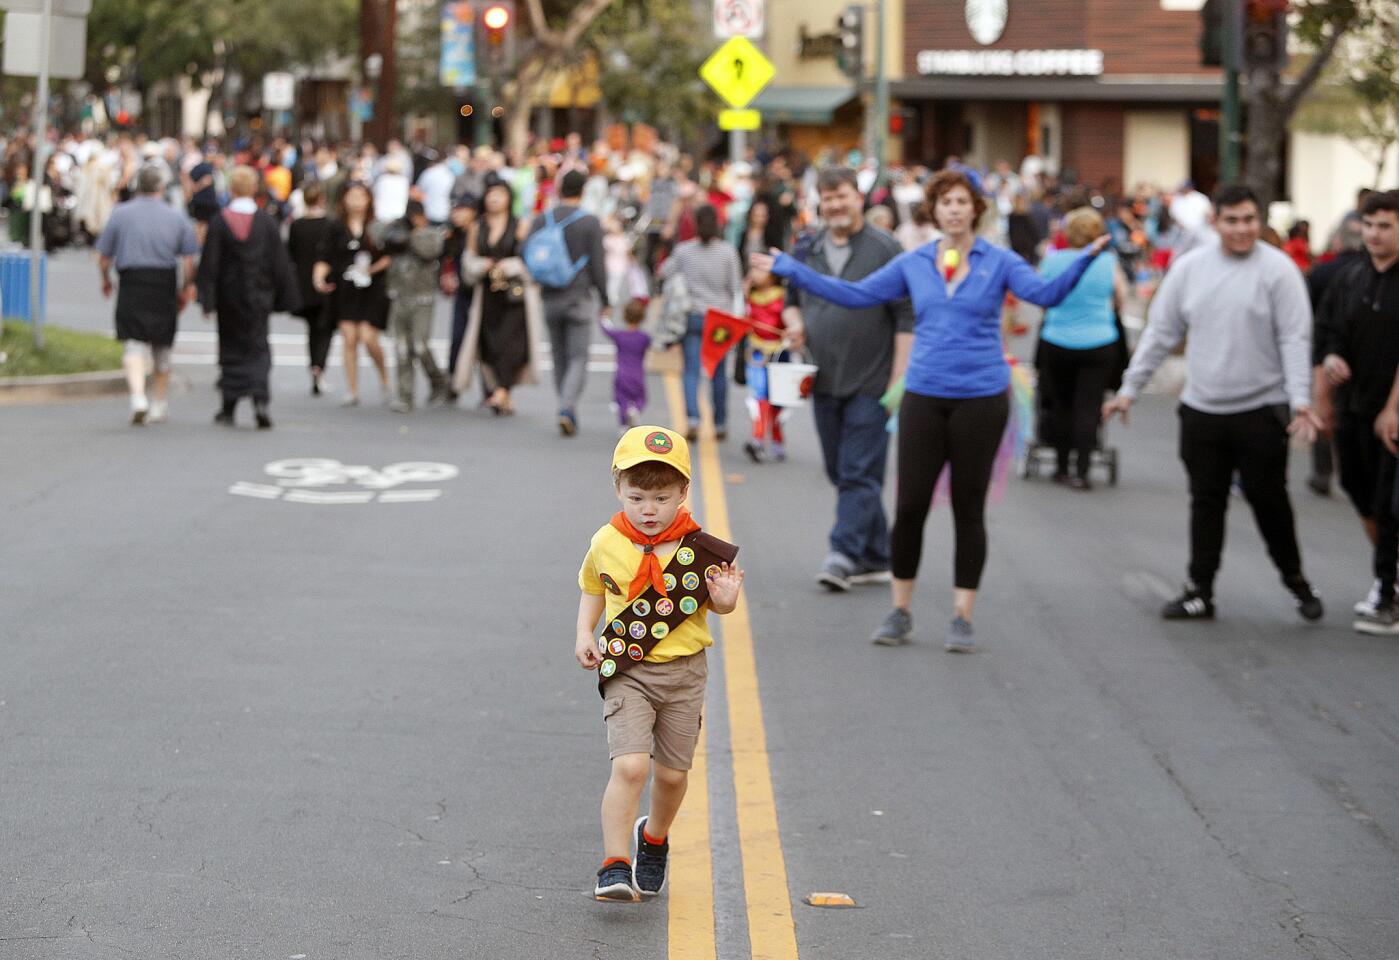 Heather Jones, as her son Max, 3, runs along the yellow stripes on Honolulu Boulevard, calls again and again for him to return at the annual Montrose Halloween Spooktacular on Honolulu Boulevard on Wednesday, October 31, 2018. Honolulu was closed for three blocks where most businesses had their front doors open as a platform for giving hundreds of small and large children candy and Halloween tokens.